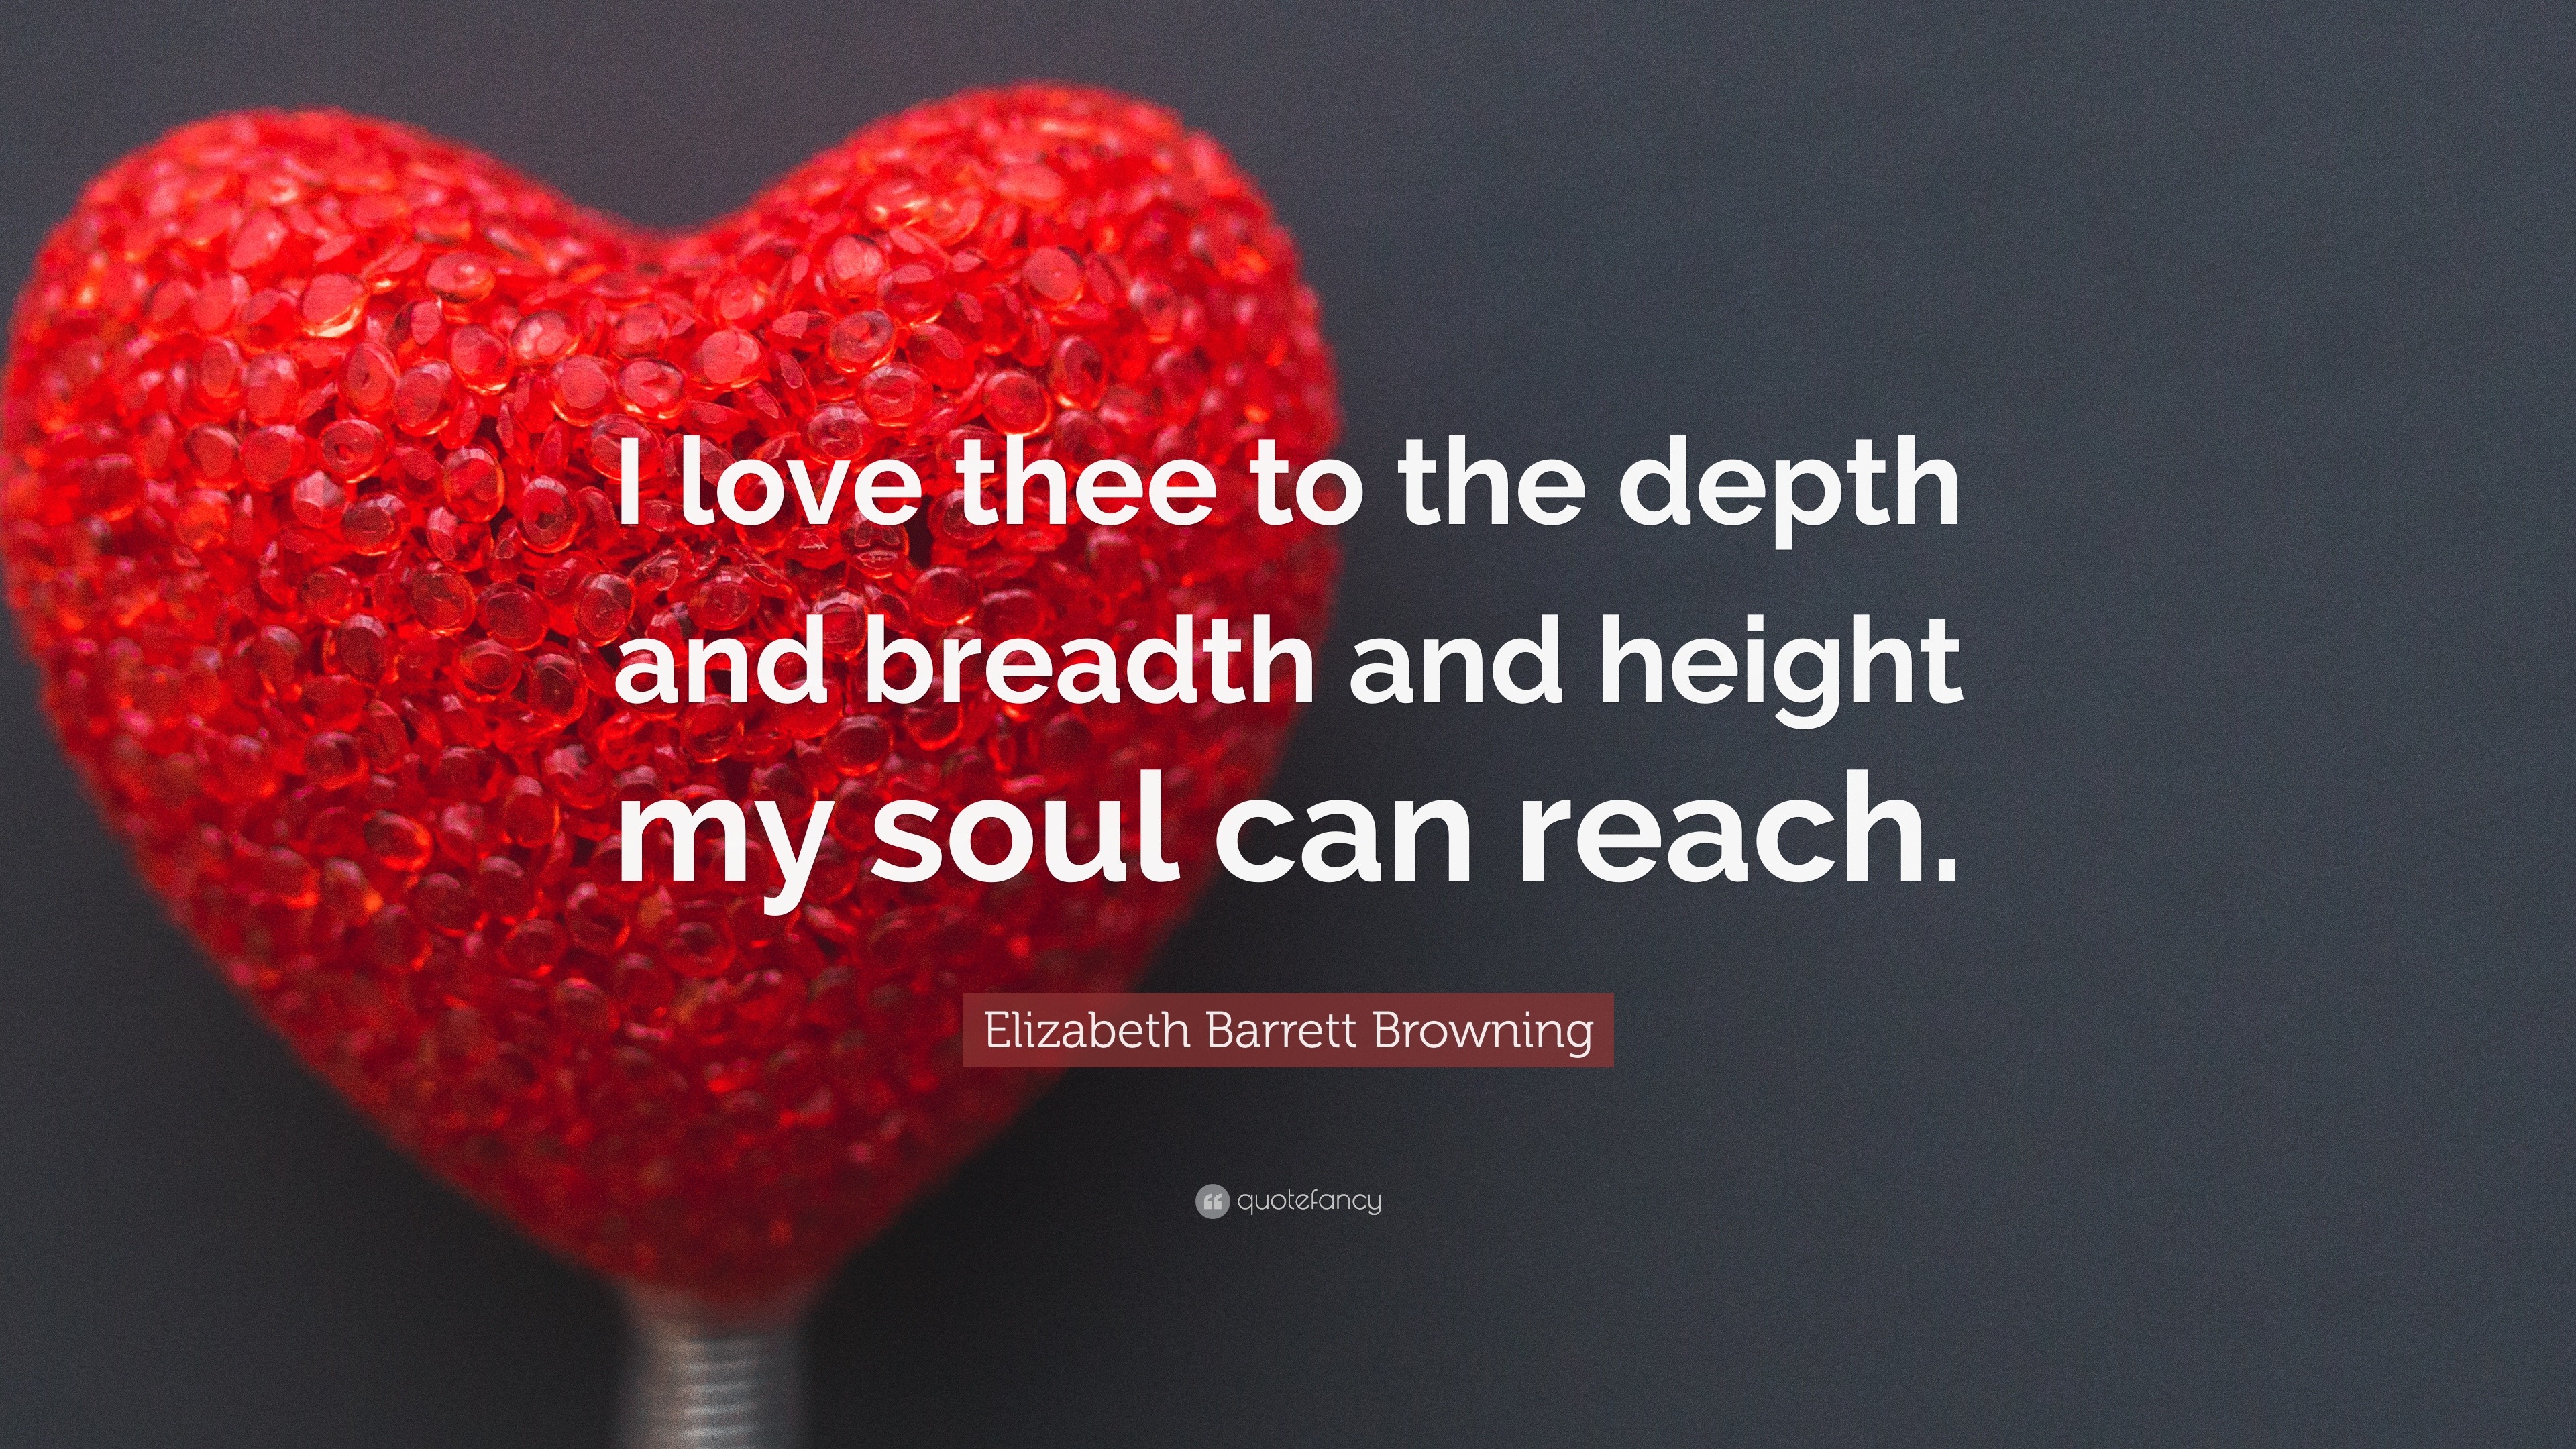 Soul Quotes “I love thee to the depth and breadth and height my soul